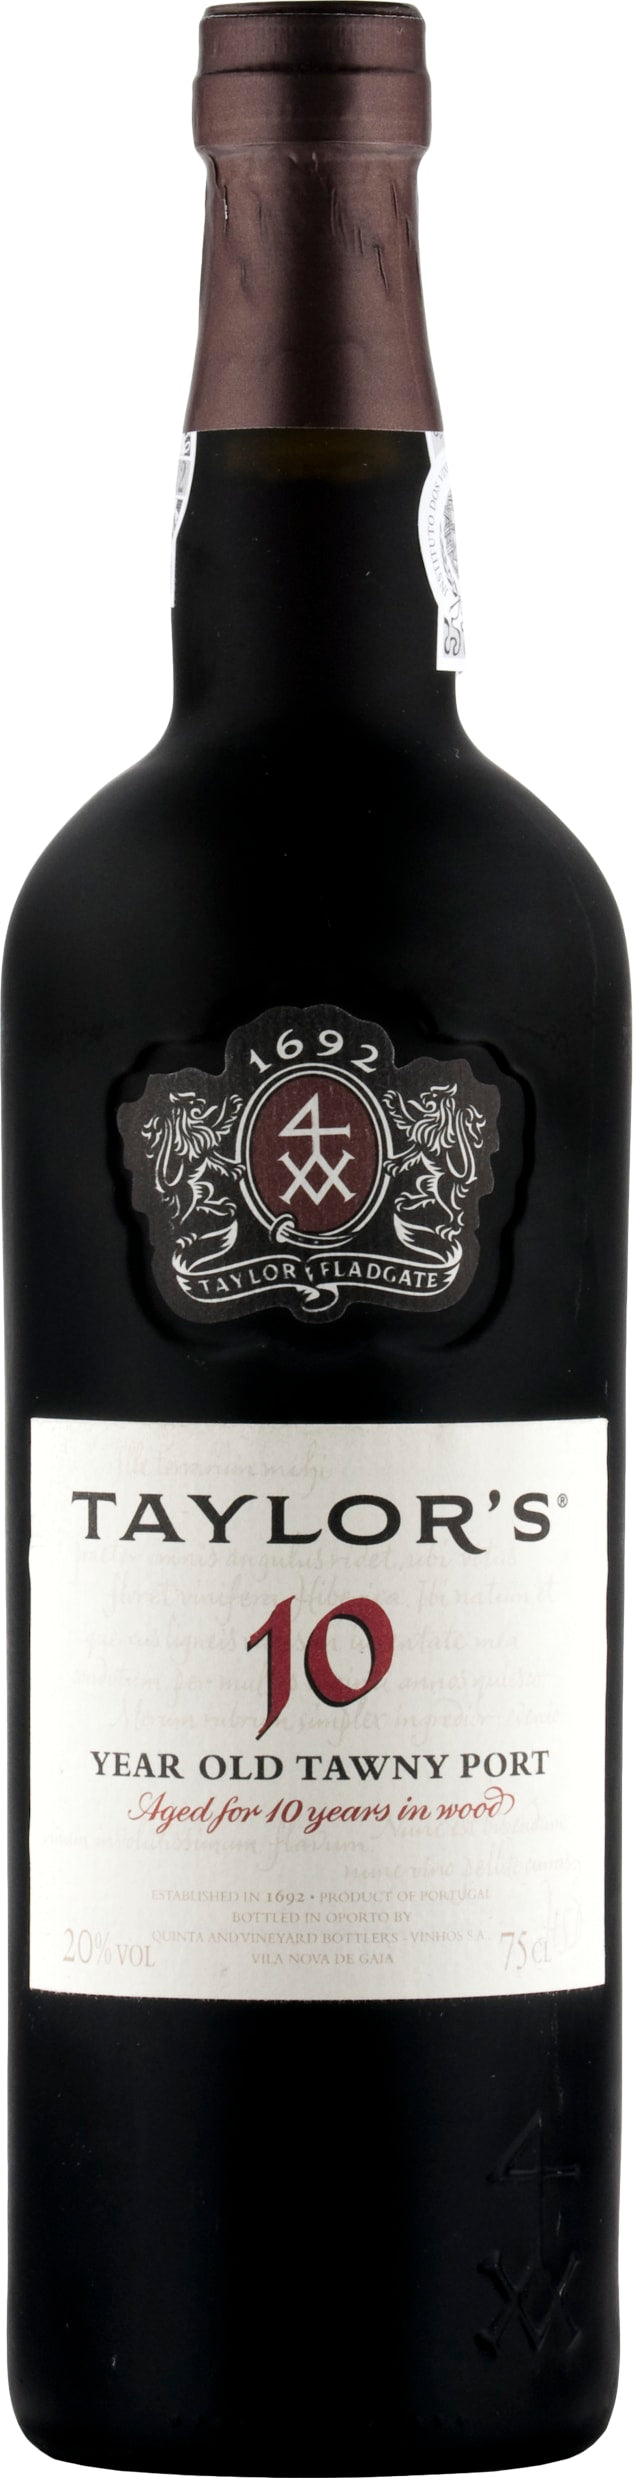 Taylor's 10yo Tawny Port 75cl NV - Buy Taylor's Wines from GREAT WINES DIRECT wine shop